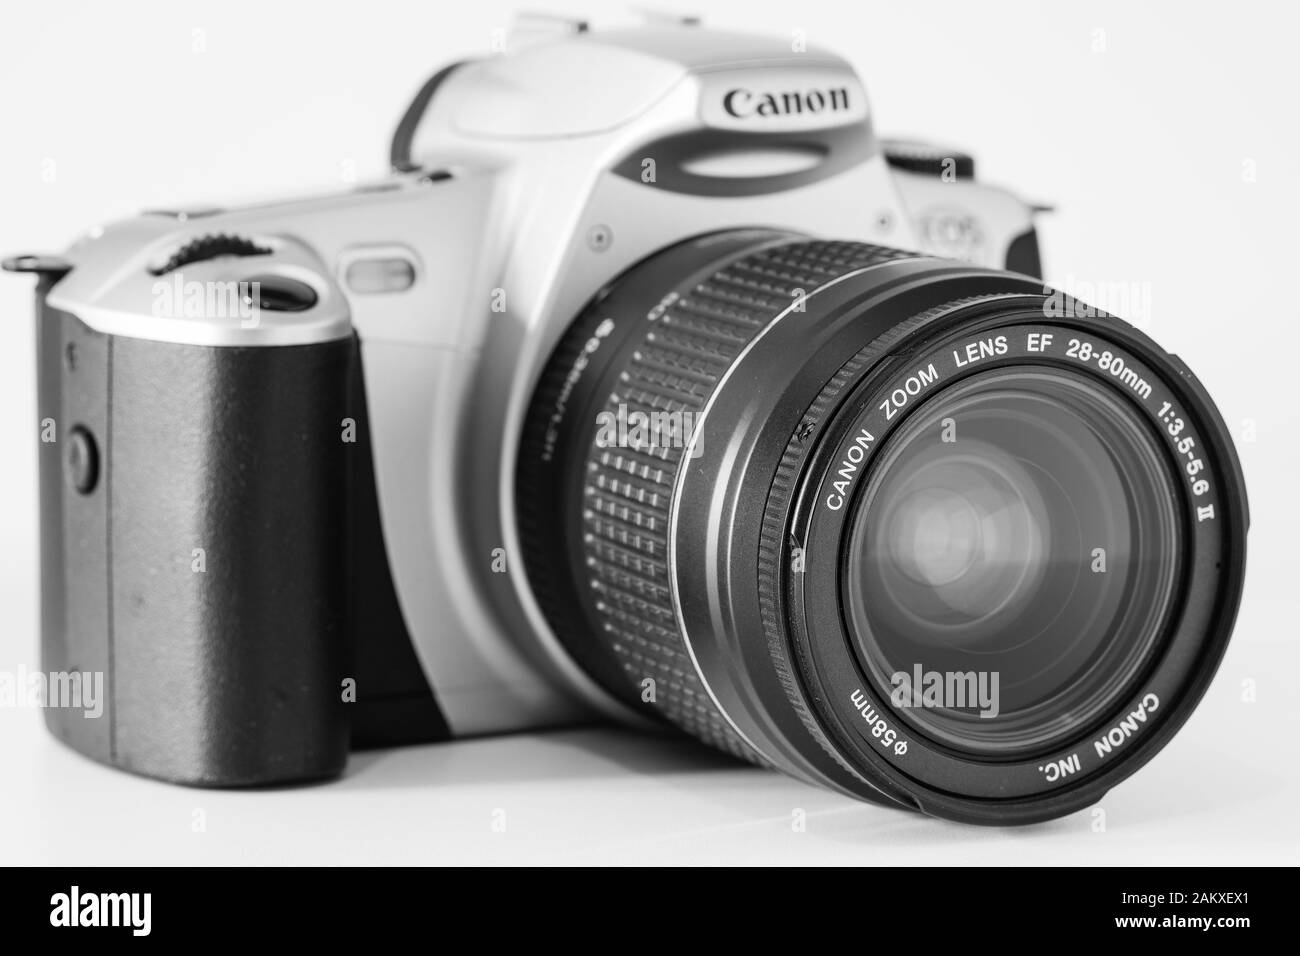 Front view of a Canon Eos 300 camera with target 28 80mm inserted, analog system, black and white image. Stock Photo